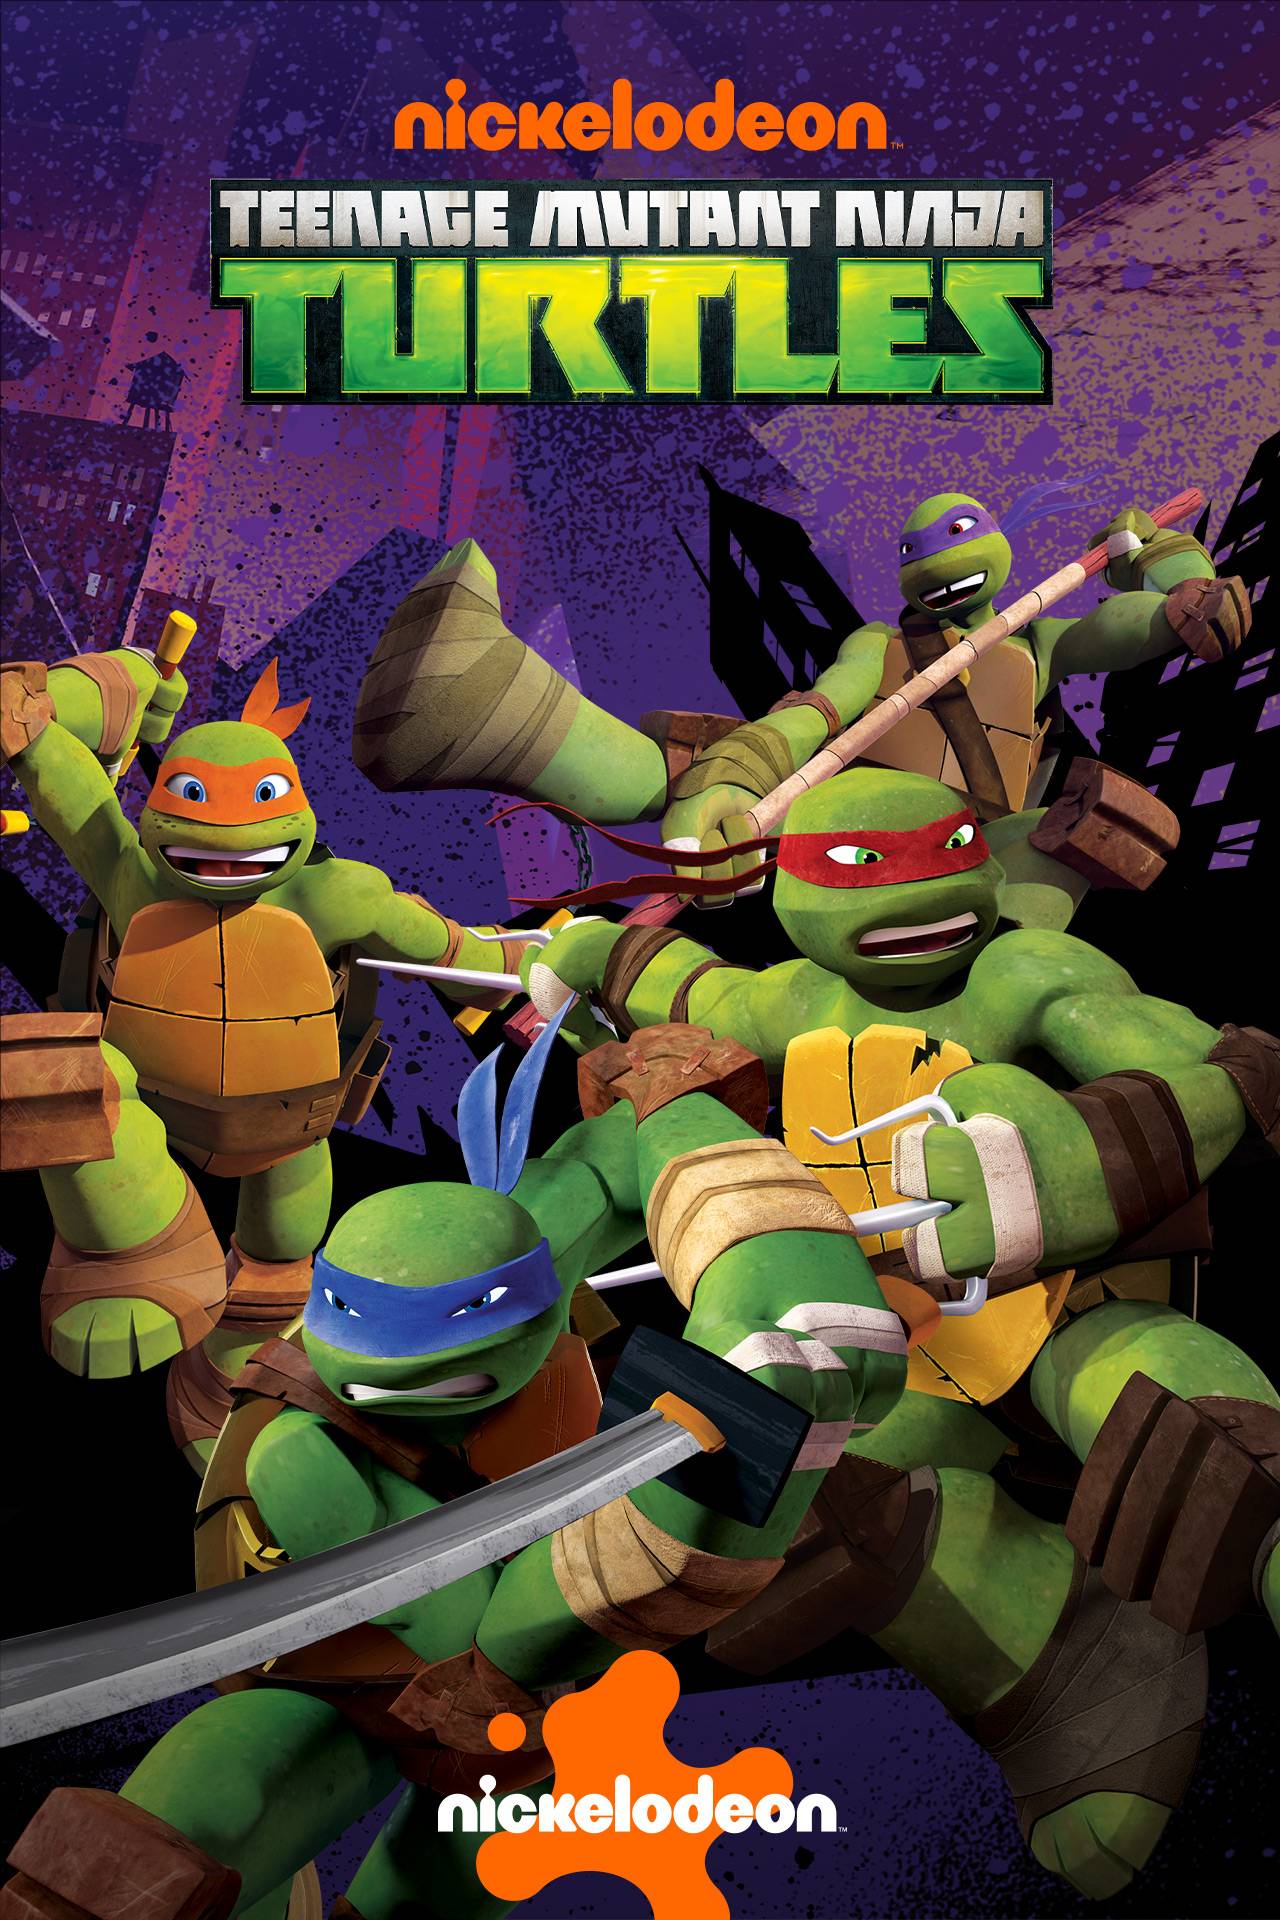 TMNT References in Television and Movies!